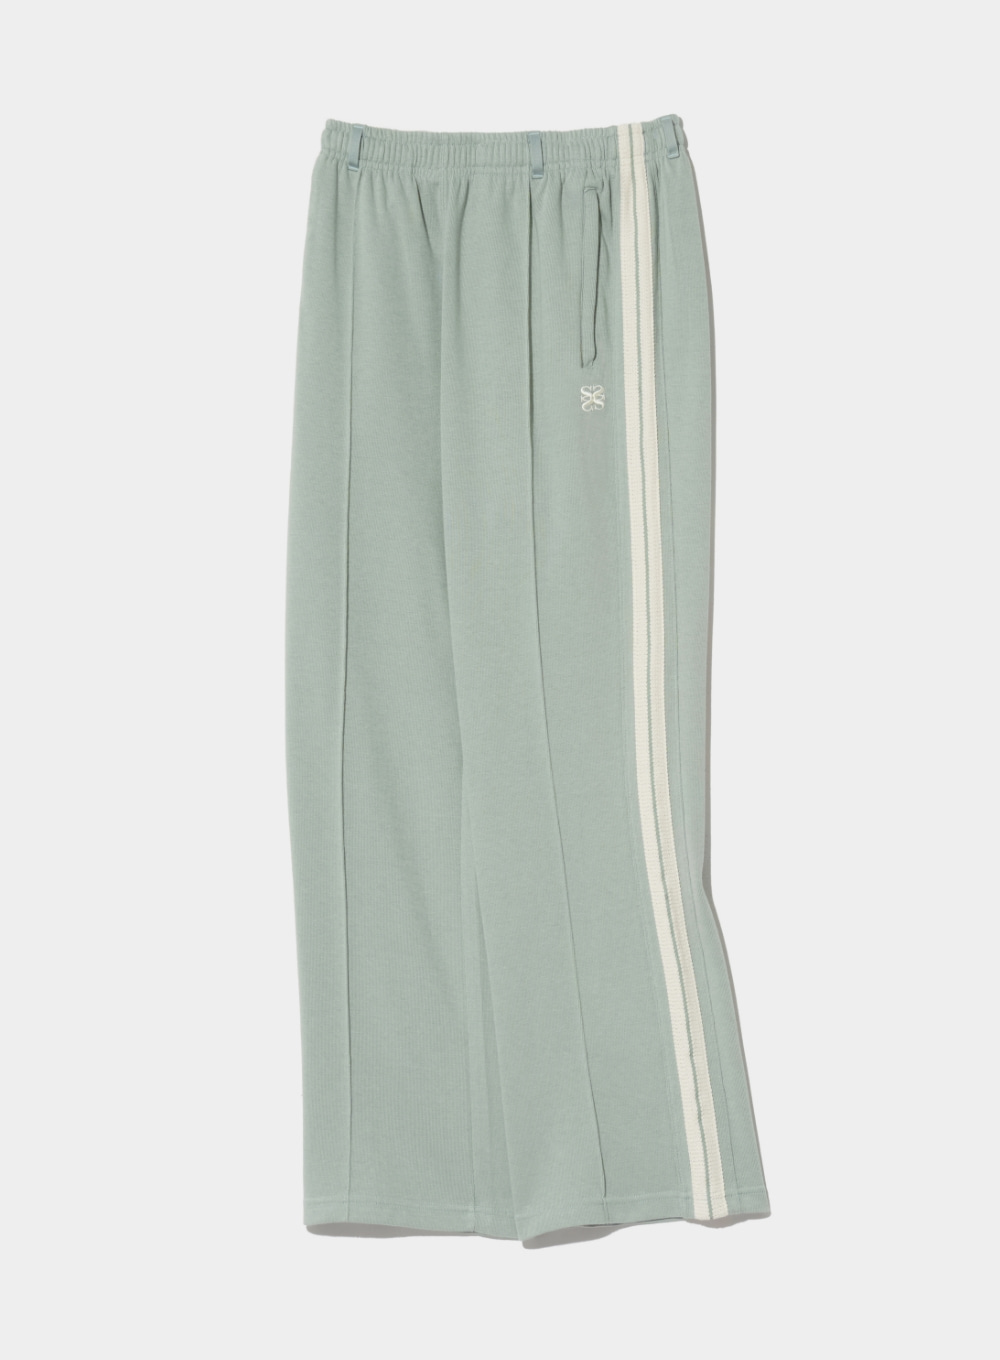 Lawton All Day Track Pants - Olive Mint